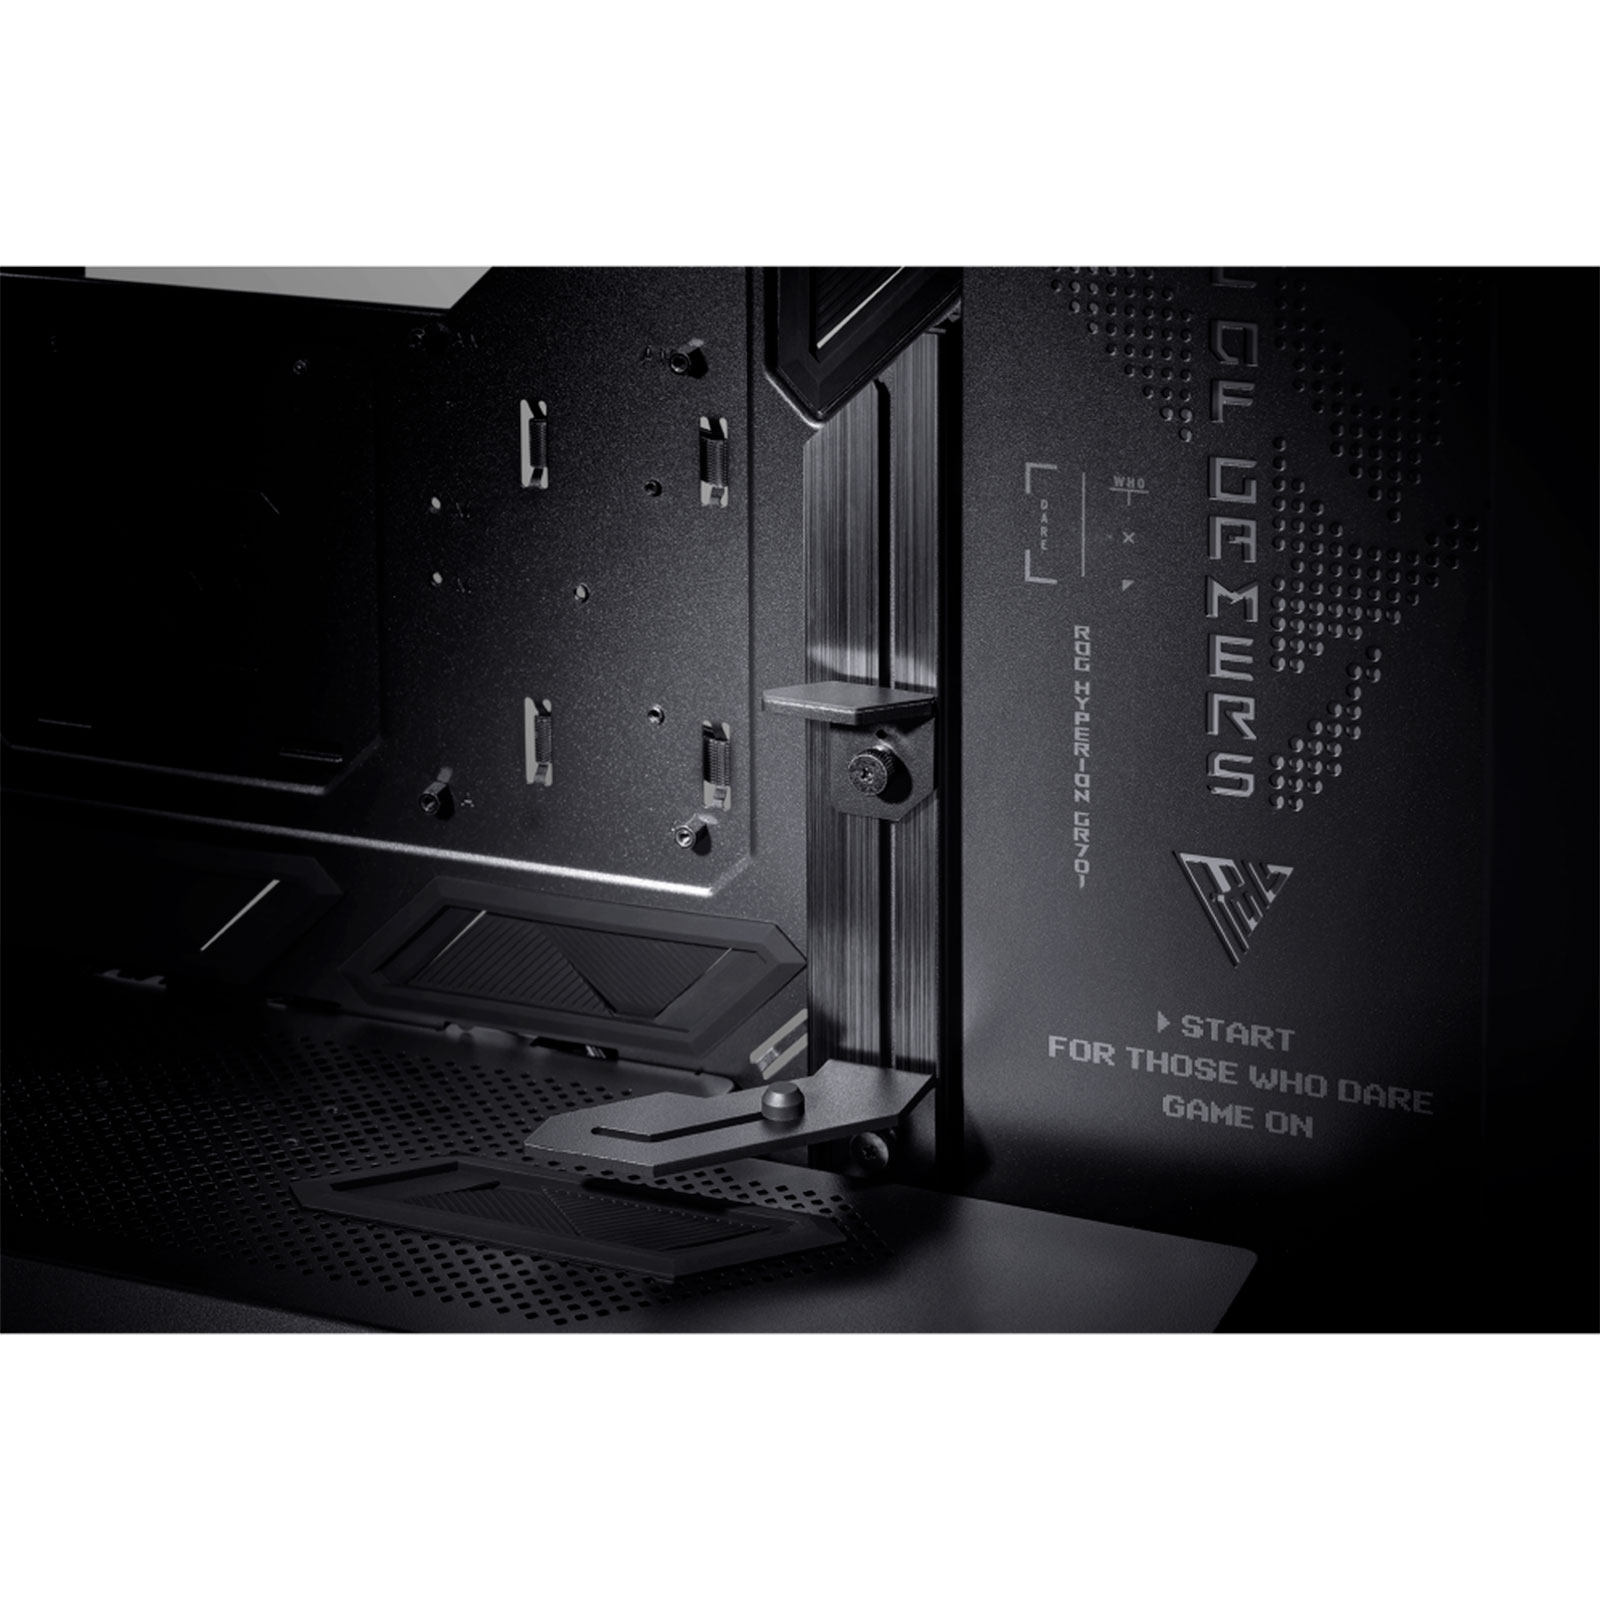 ASUS ROG Hyperion GR701 - PC chassis review (Page 6)